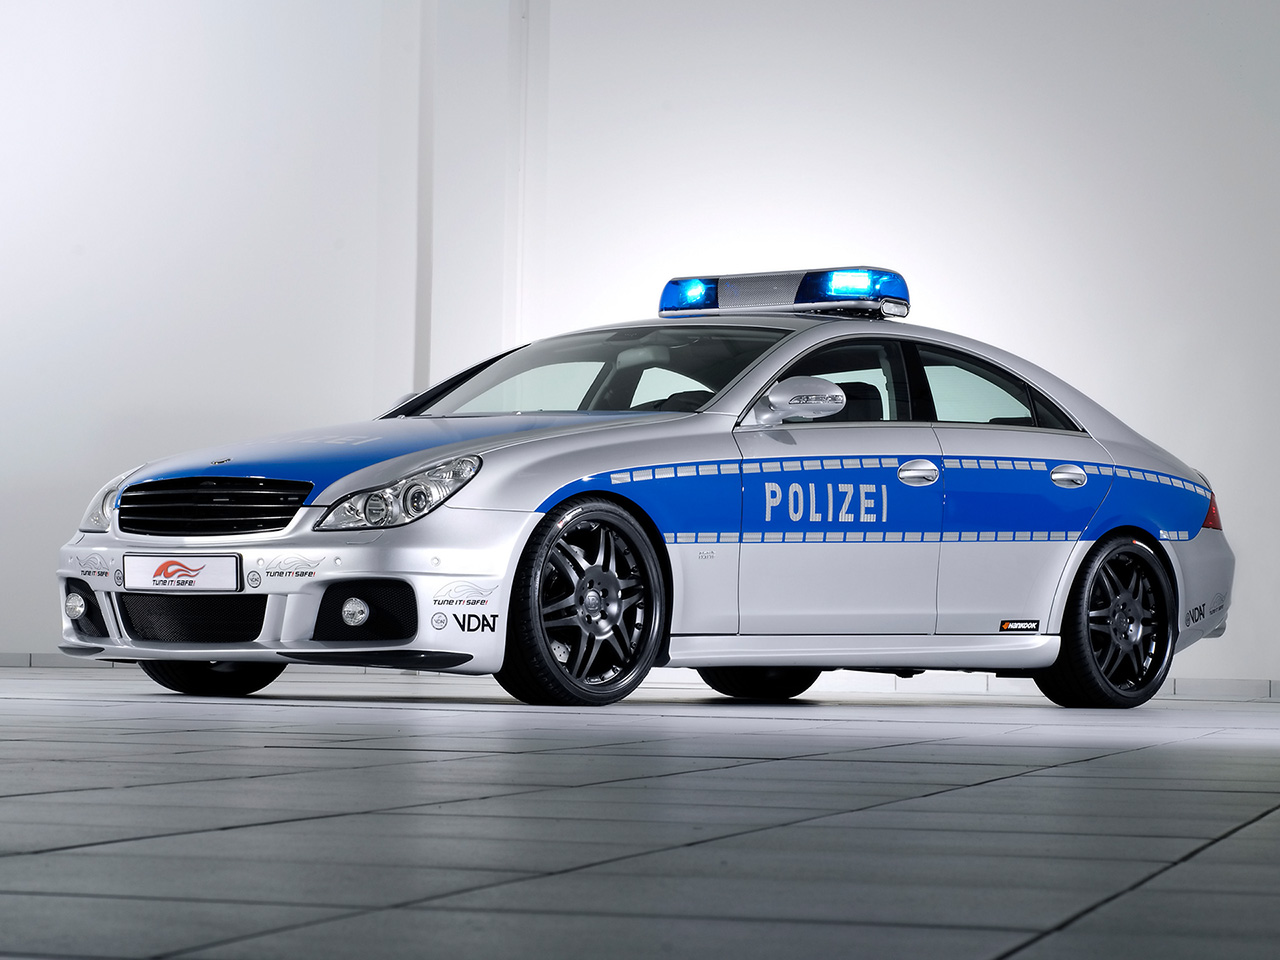 2006-Brabus-Rocket-Police-Car-based-on-Mercedes-Benz-CLS-Front-And-Side-1280x960.jpg